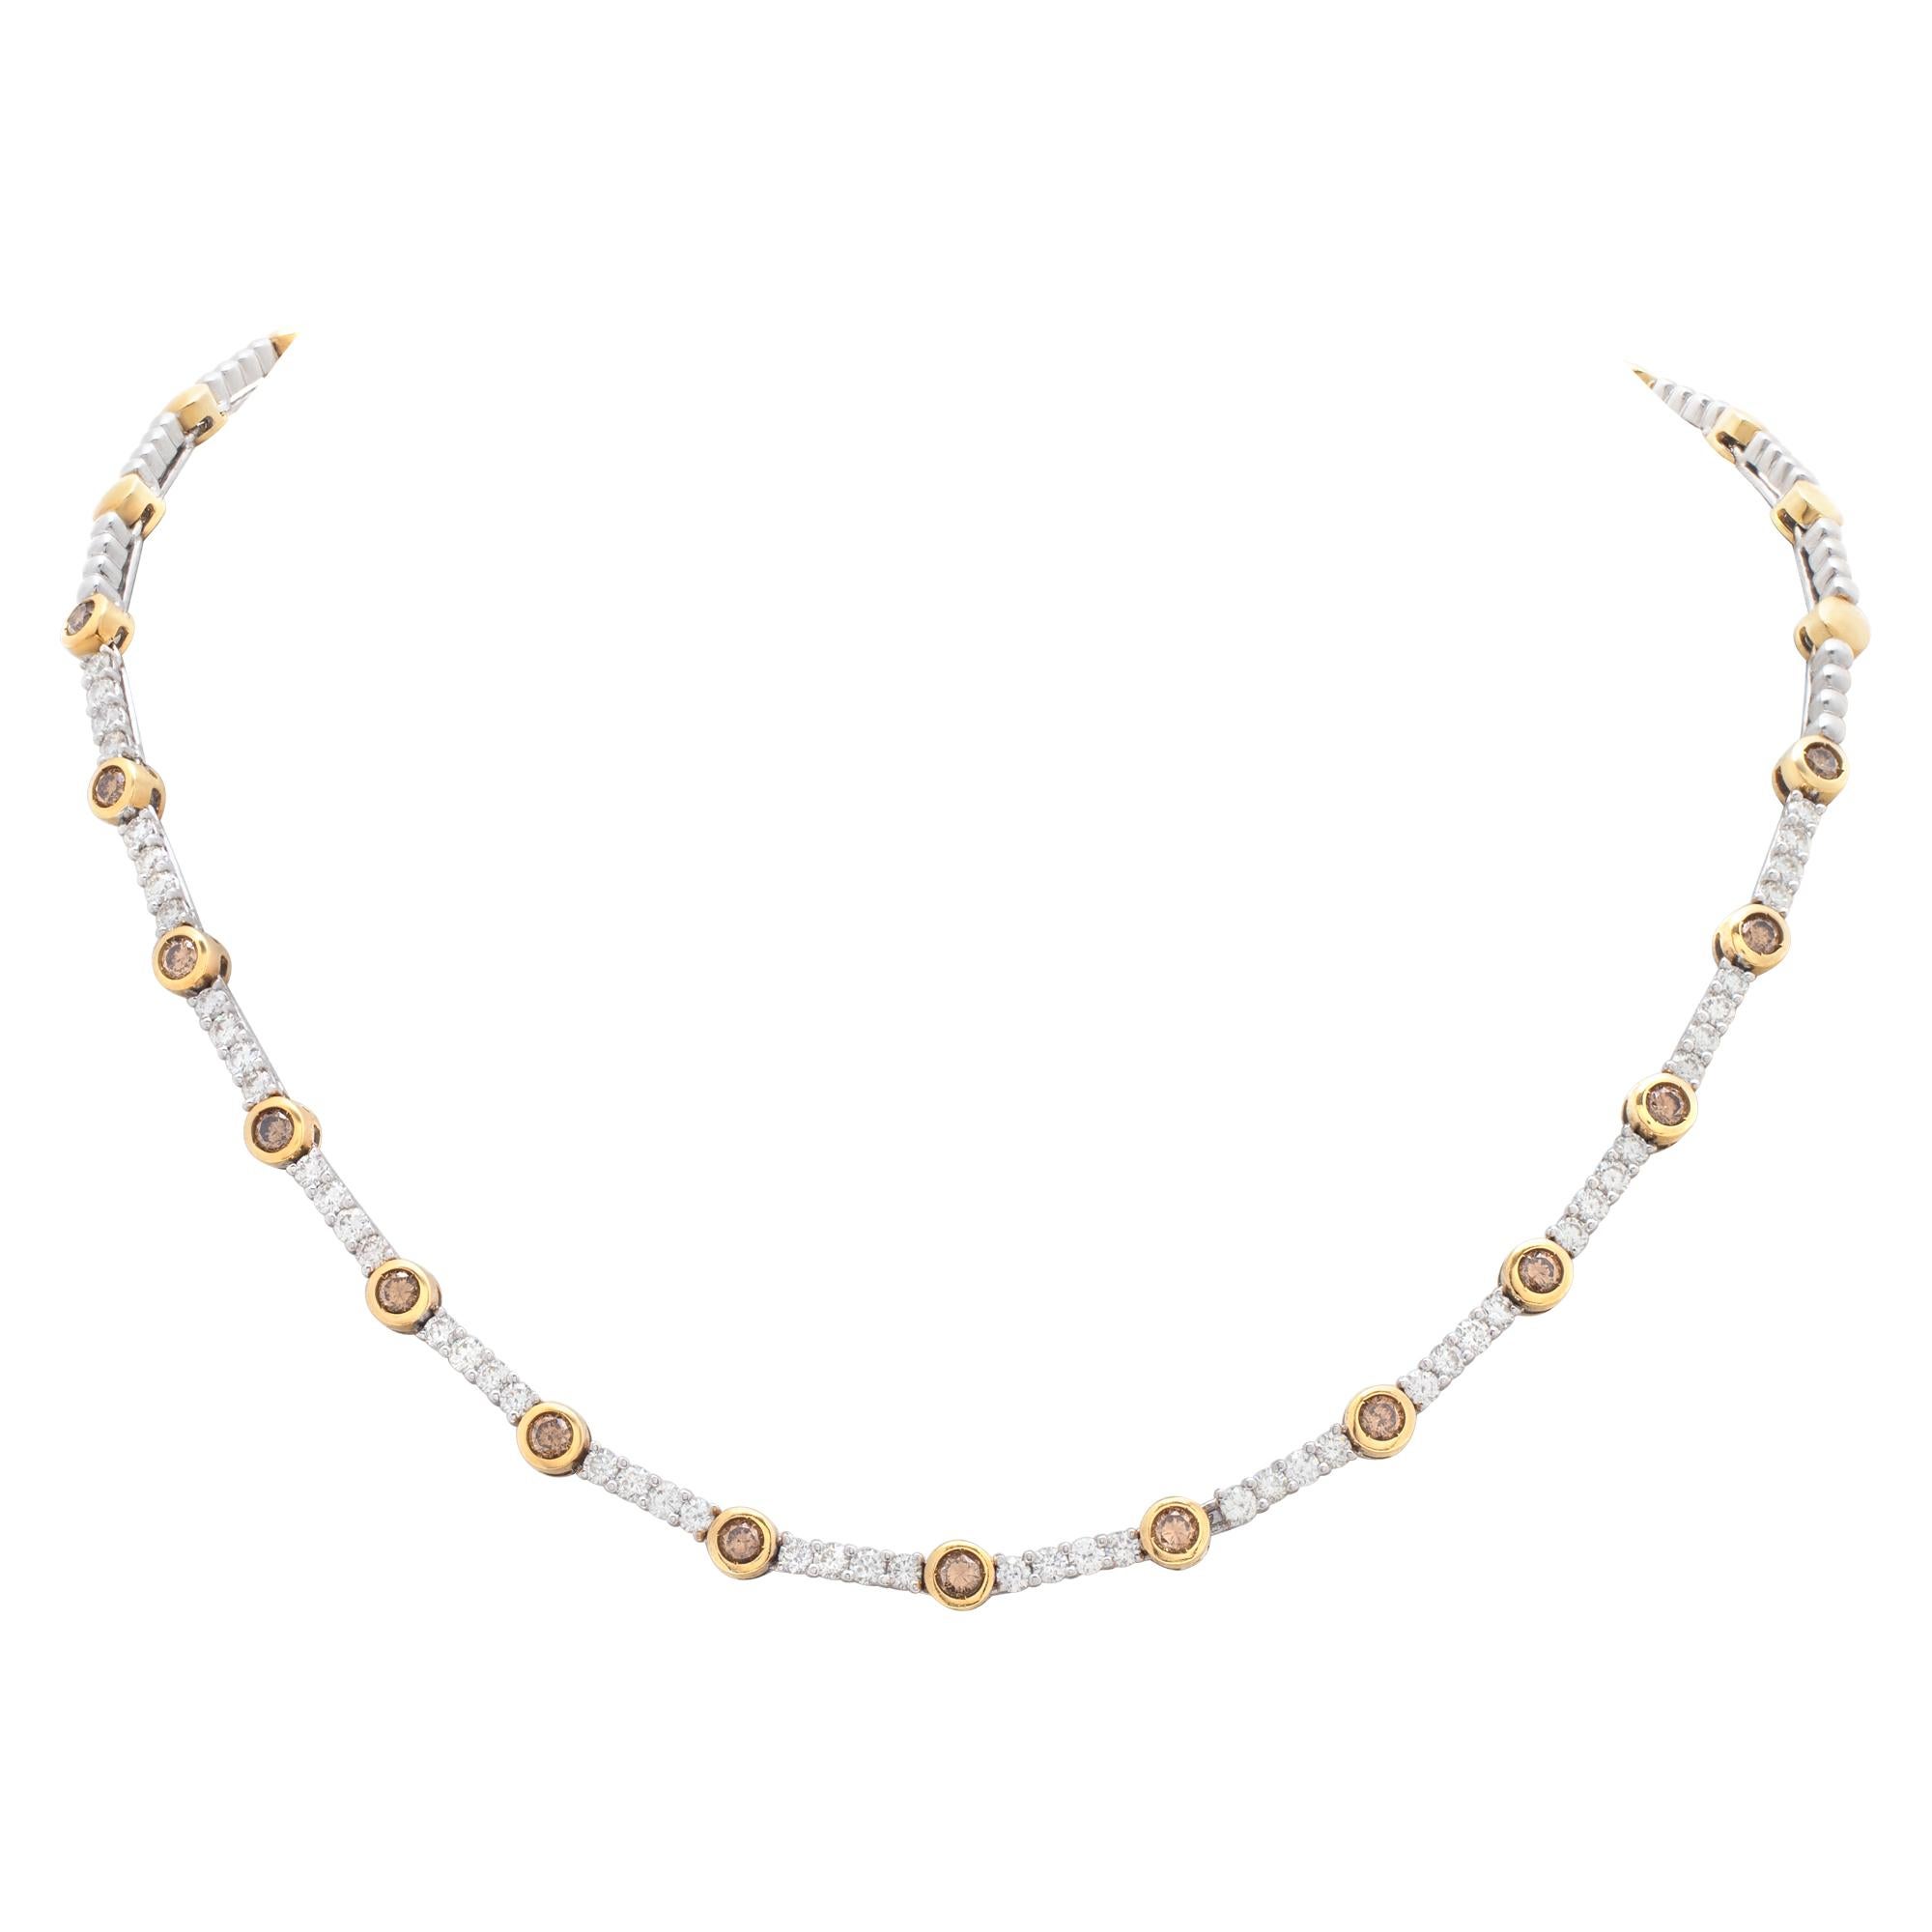 Stunning 18k white and yellow gold necklace with approximately 2.08 carats in white diamonds and 1.40 carats in champagne diamonds. Length 16'', width 2.5mm - 4mm.